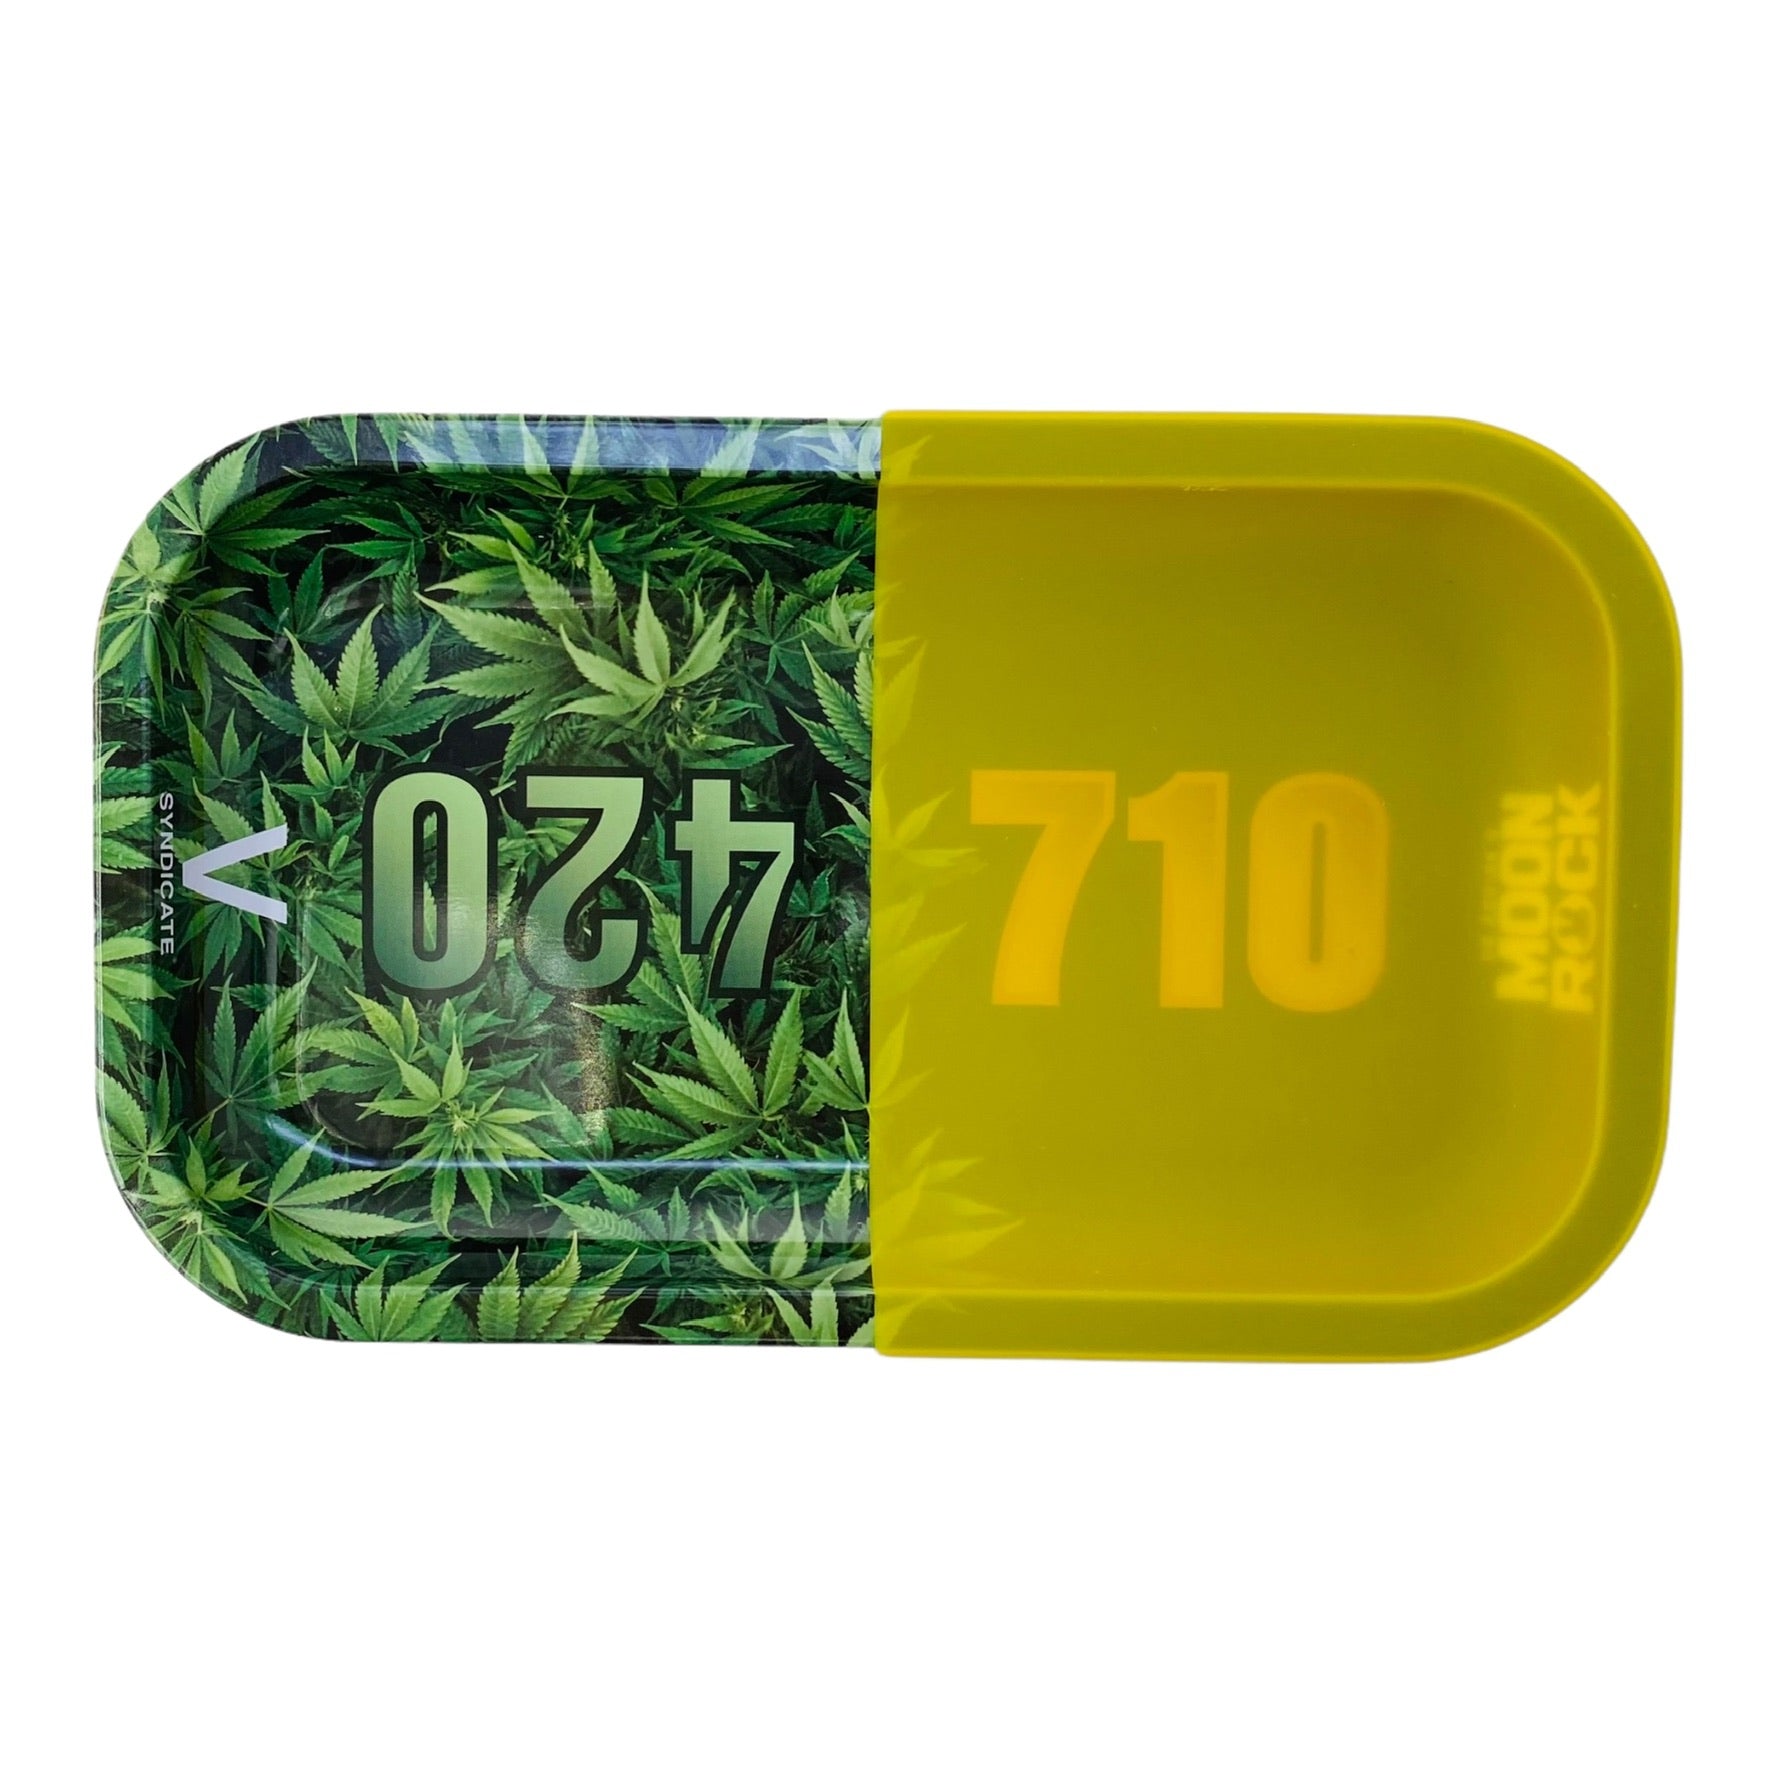 V Syndicate Metal And Silicone Rolling Tray Hybrid 420-710 Medium